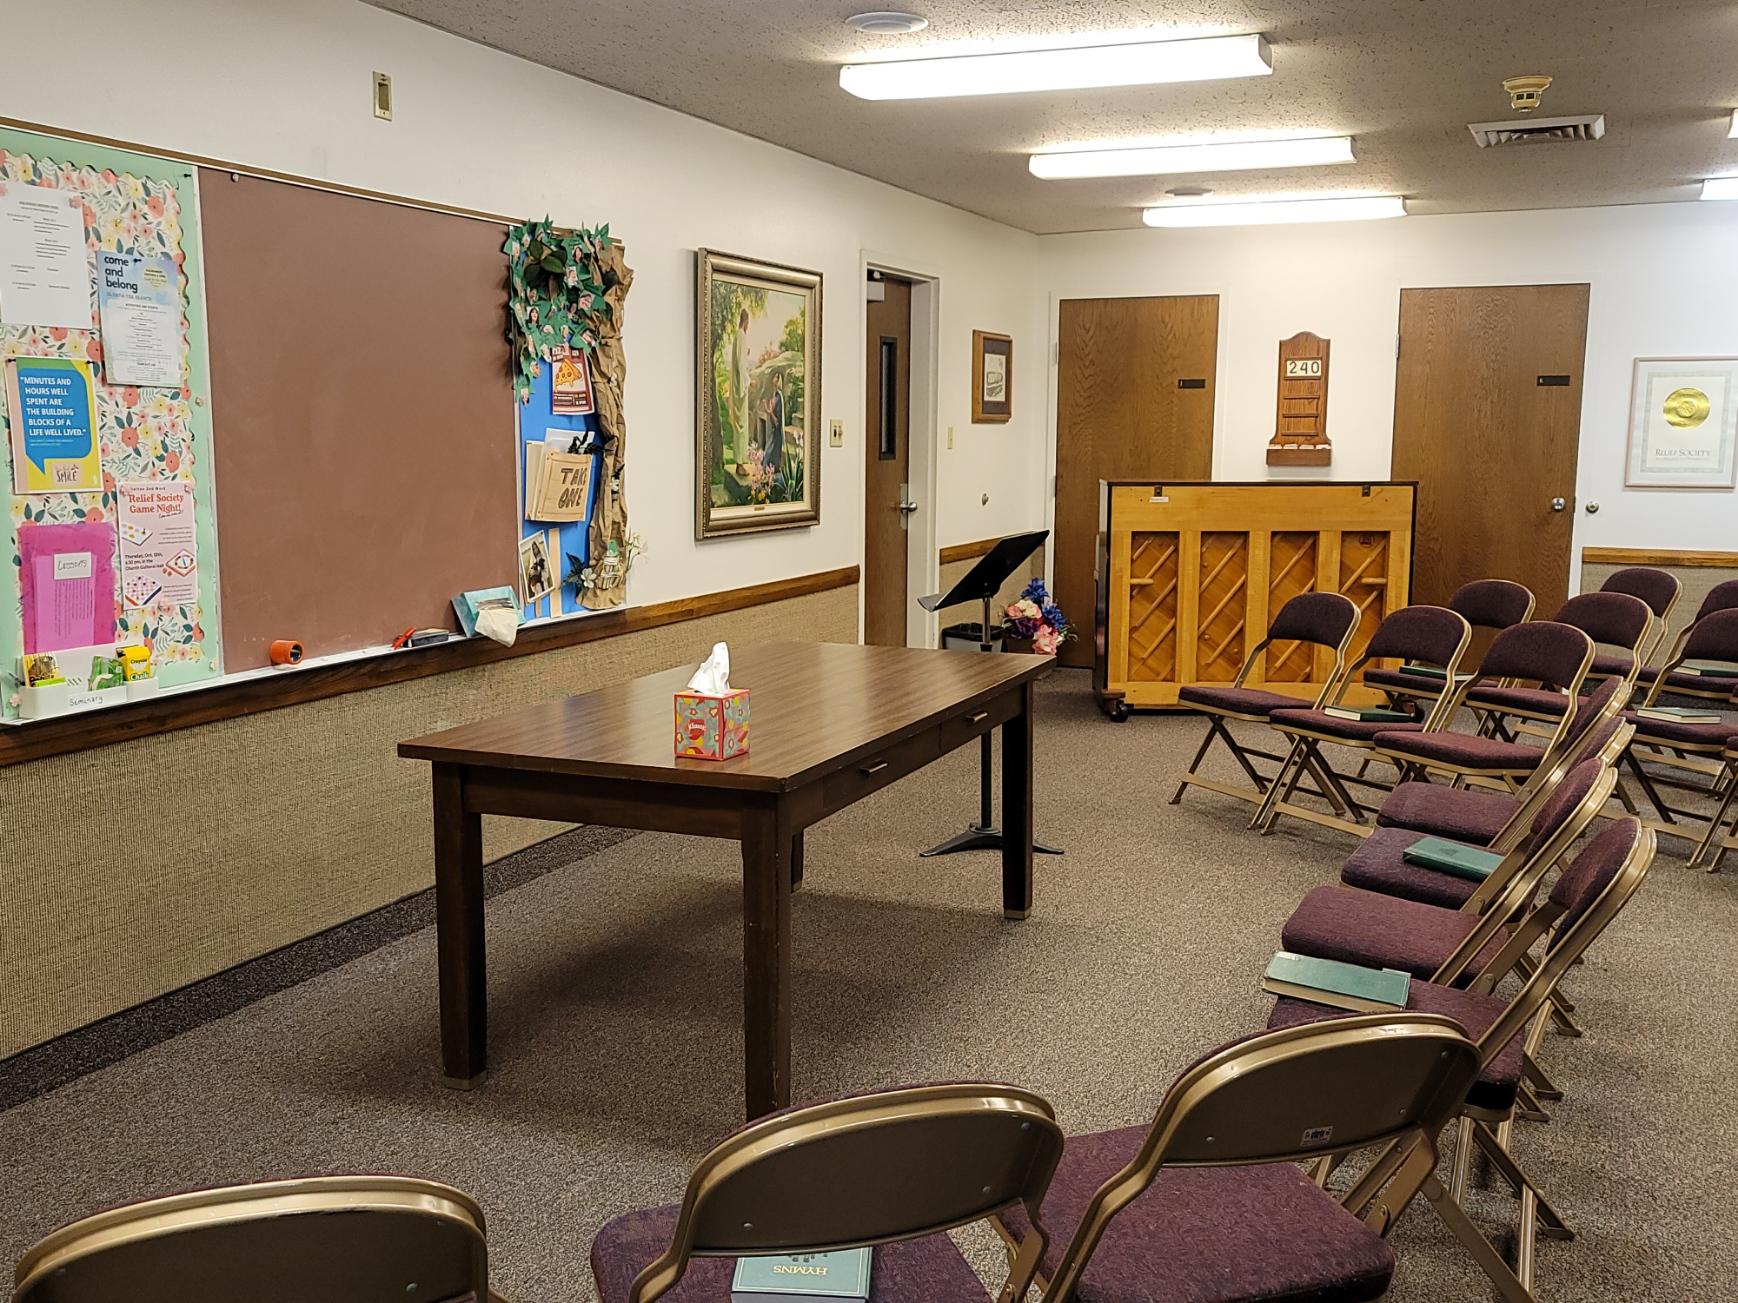 Classroom of The Church of Jesus Christ of Latter-day Saints